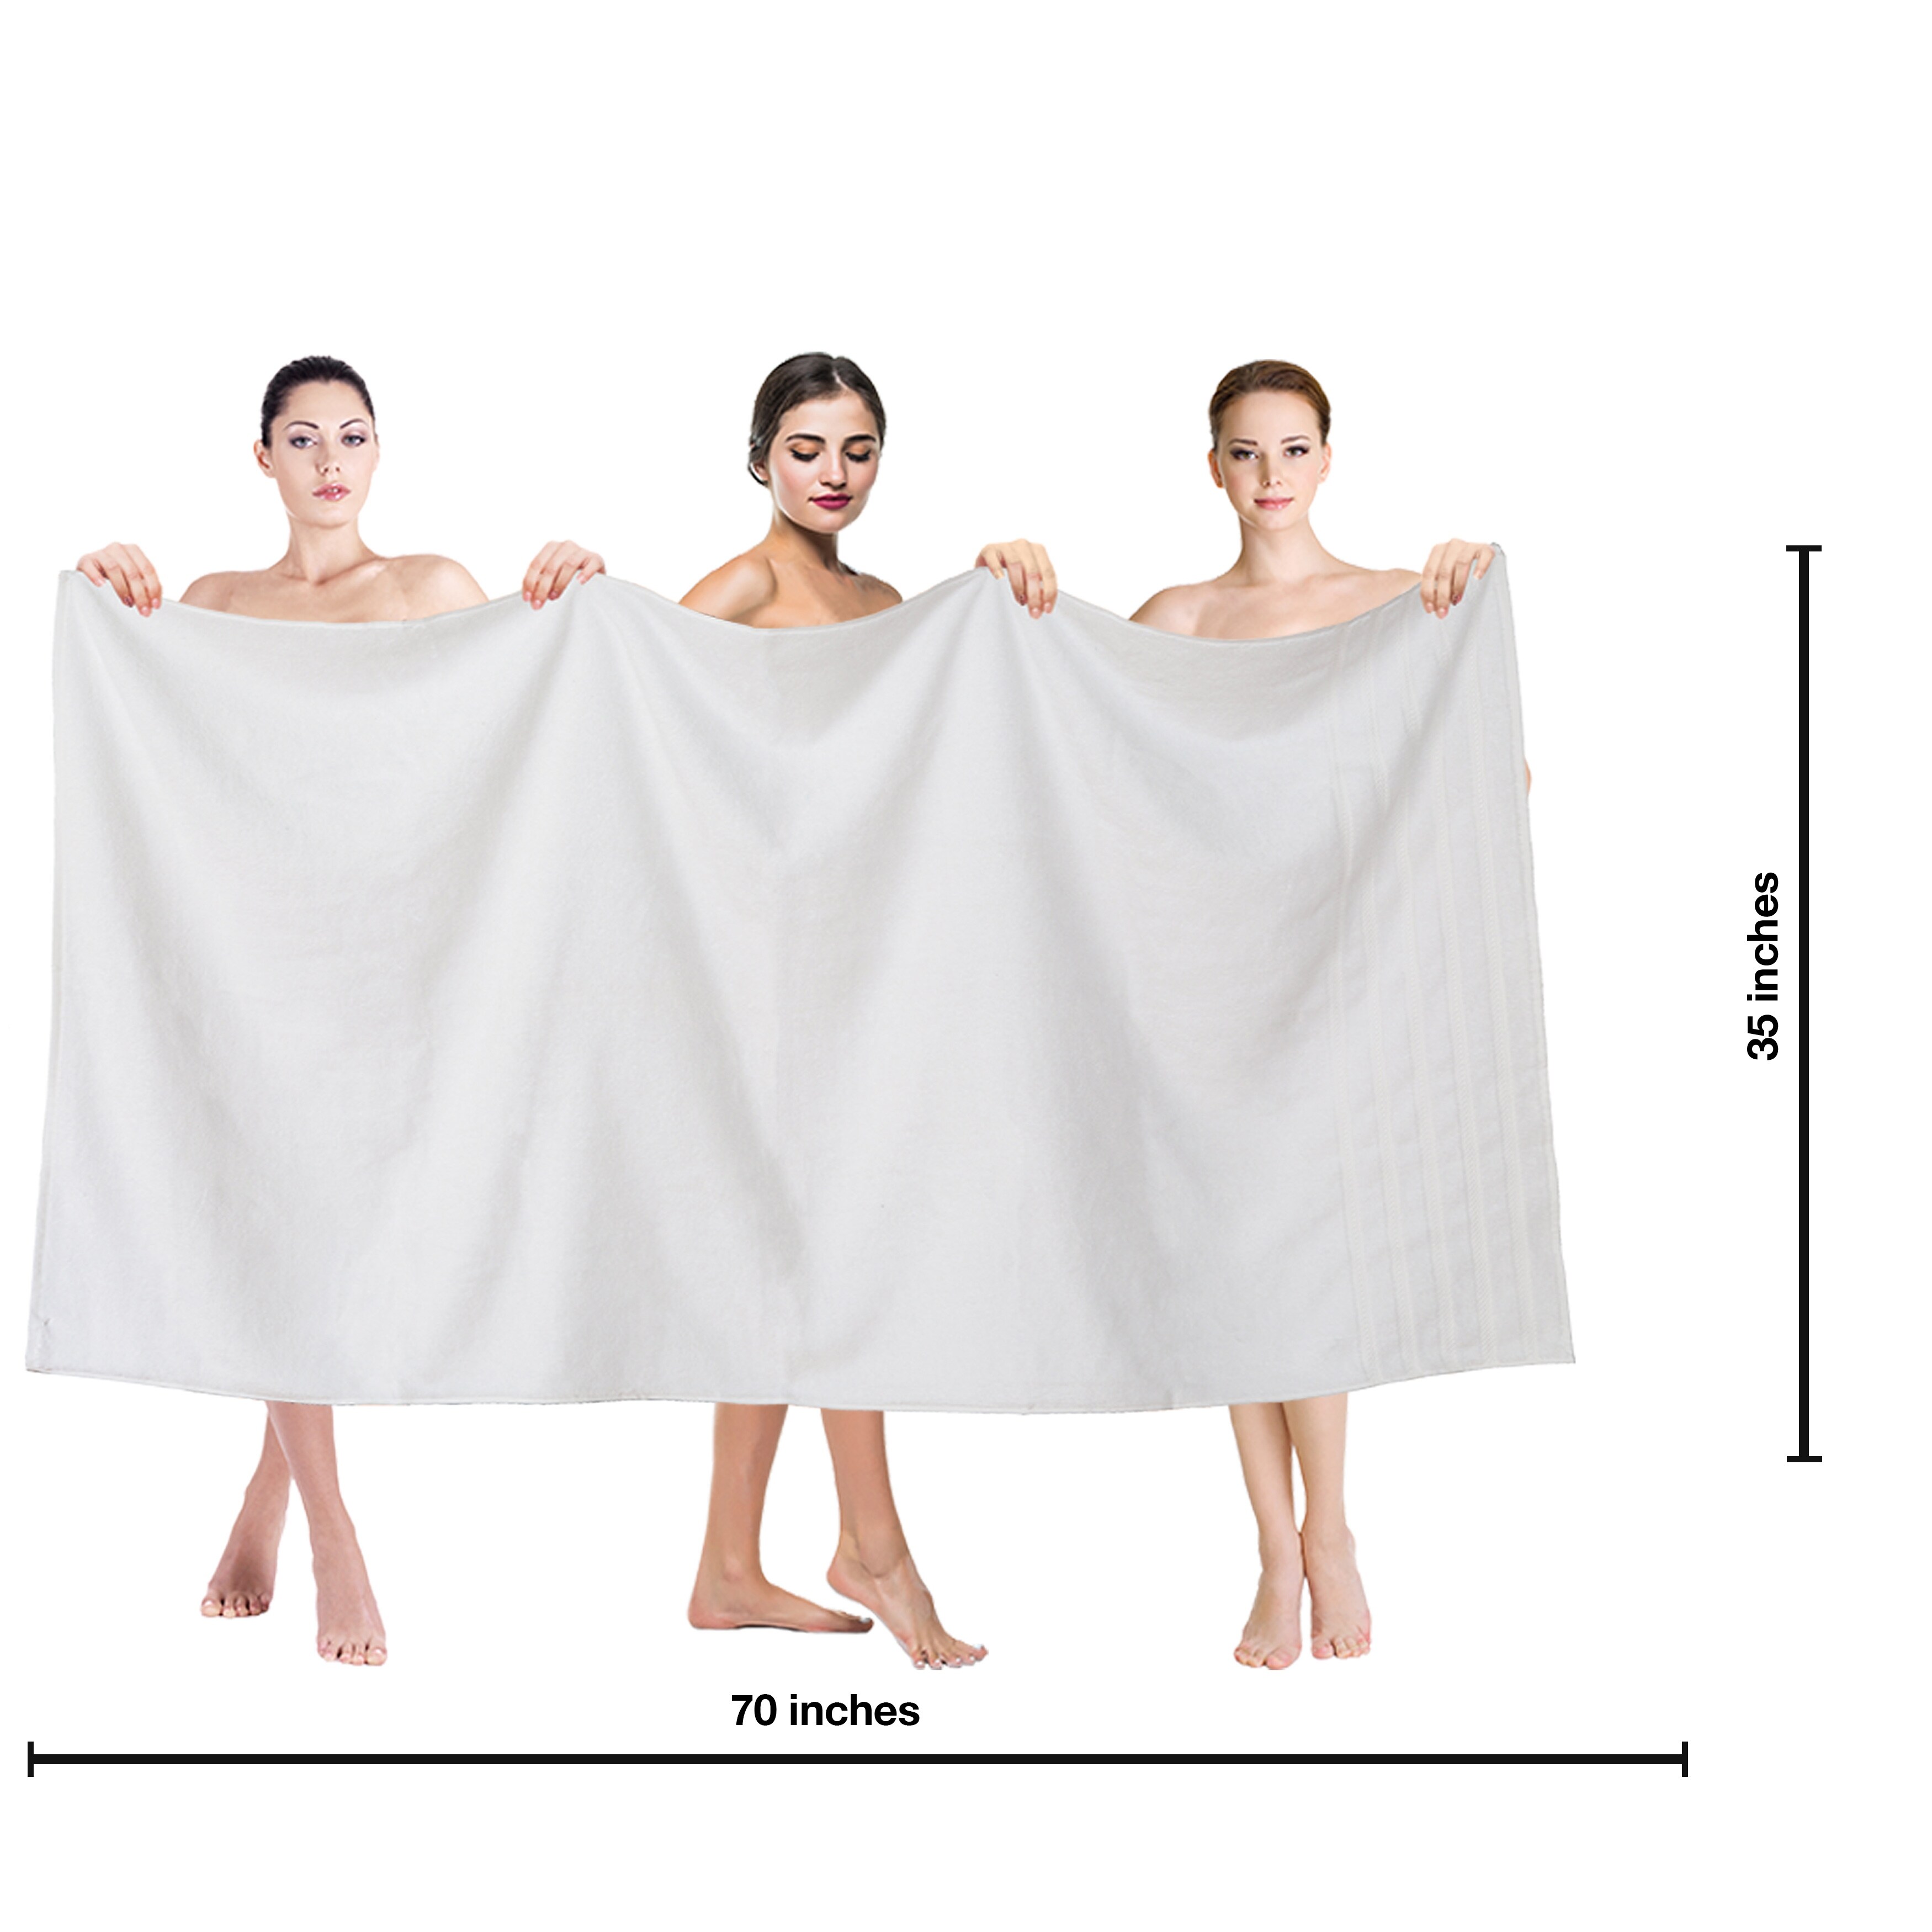 35 x 70, White 100/% Ring Spun Cotton Highly Absorbent and Quick Dry Extra Large Bath Towel Hammam Linen 100/% Cotton Luxurious Jumbo Bath Sheet